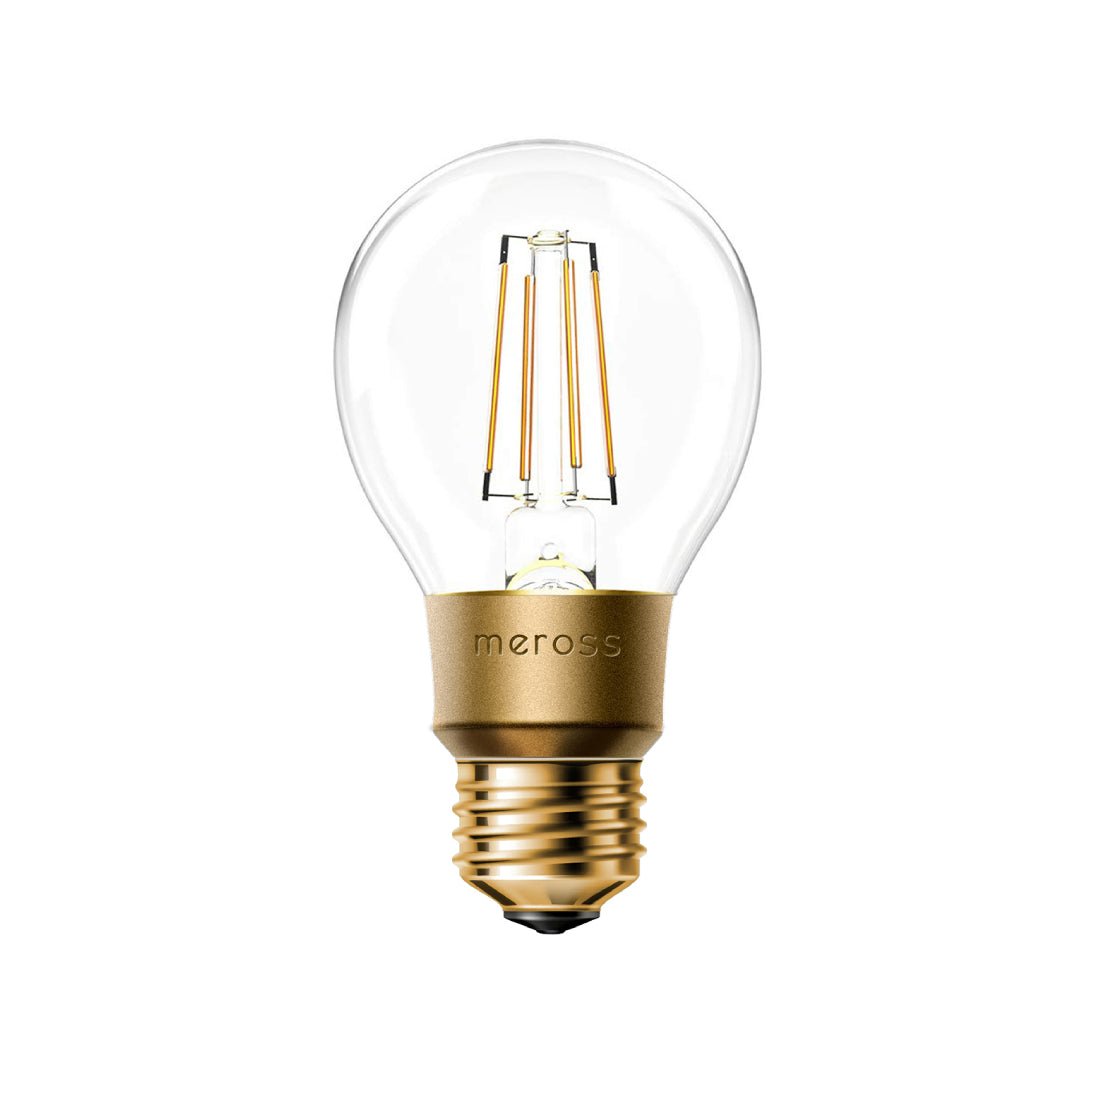 Meross Smart LED Light Bulb With Dimmable Light - 1 Pack - إضاءة - Store 974 | ستور ٩٧٤